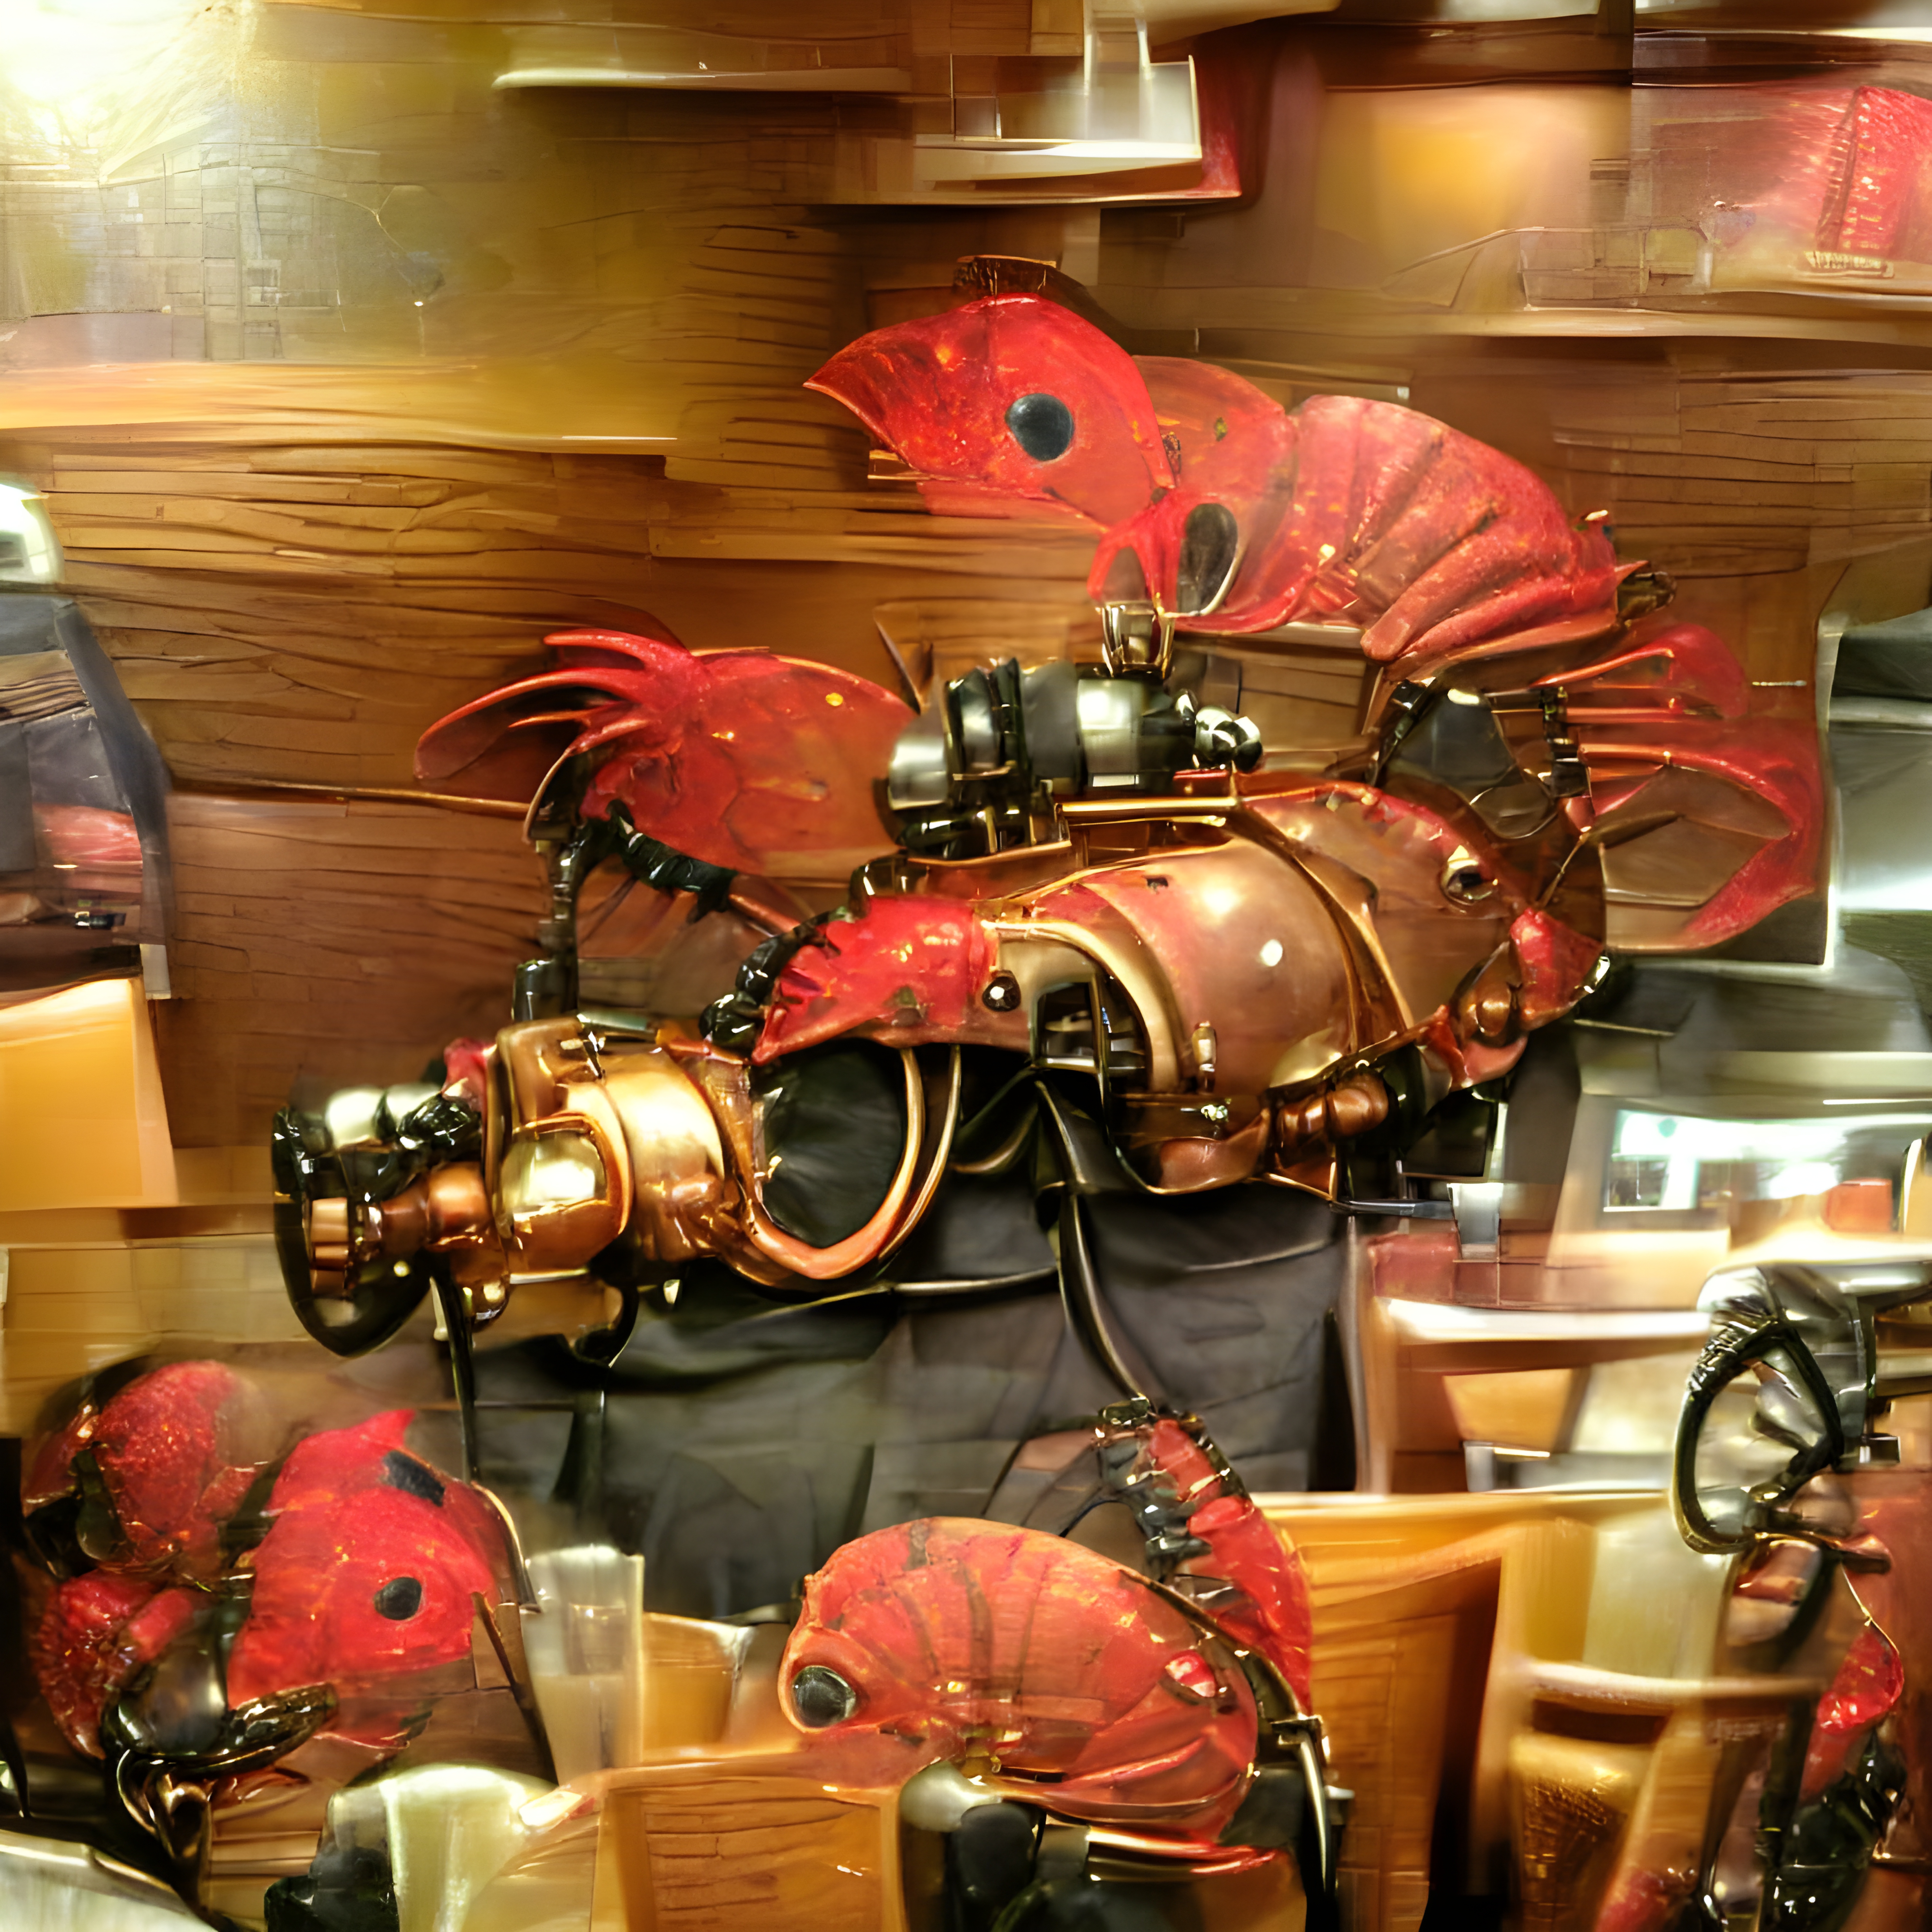 The Magnetic Lobster